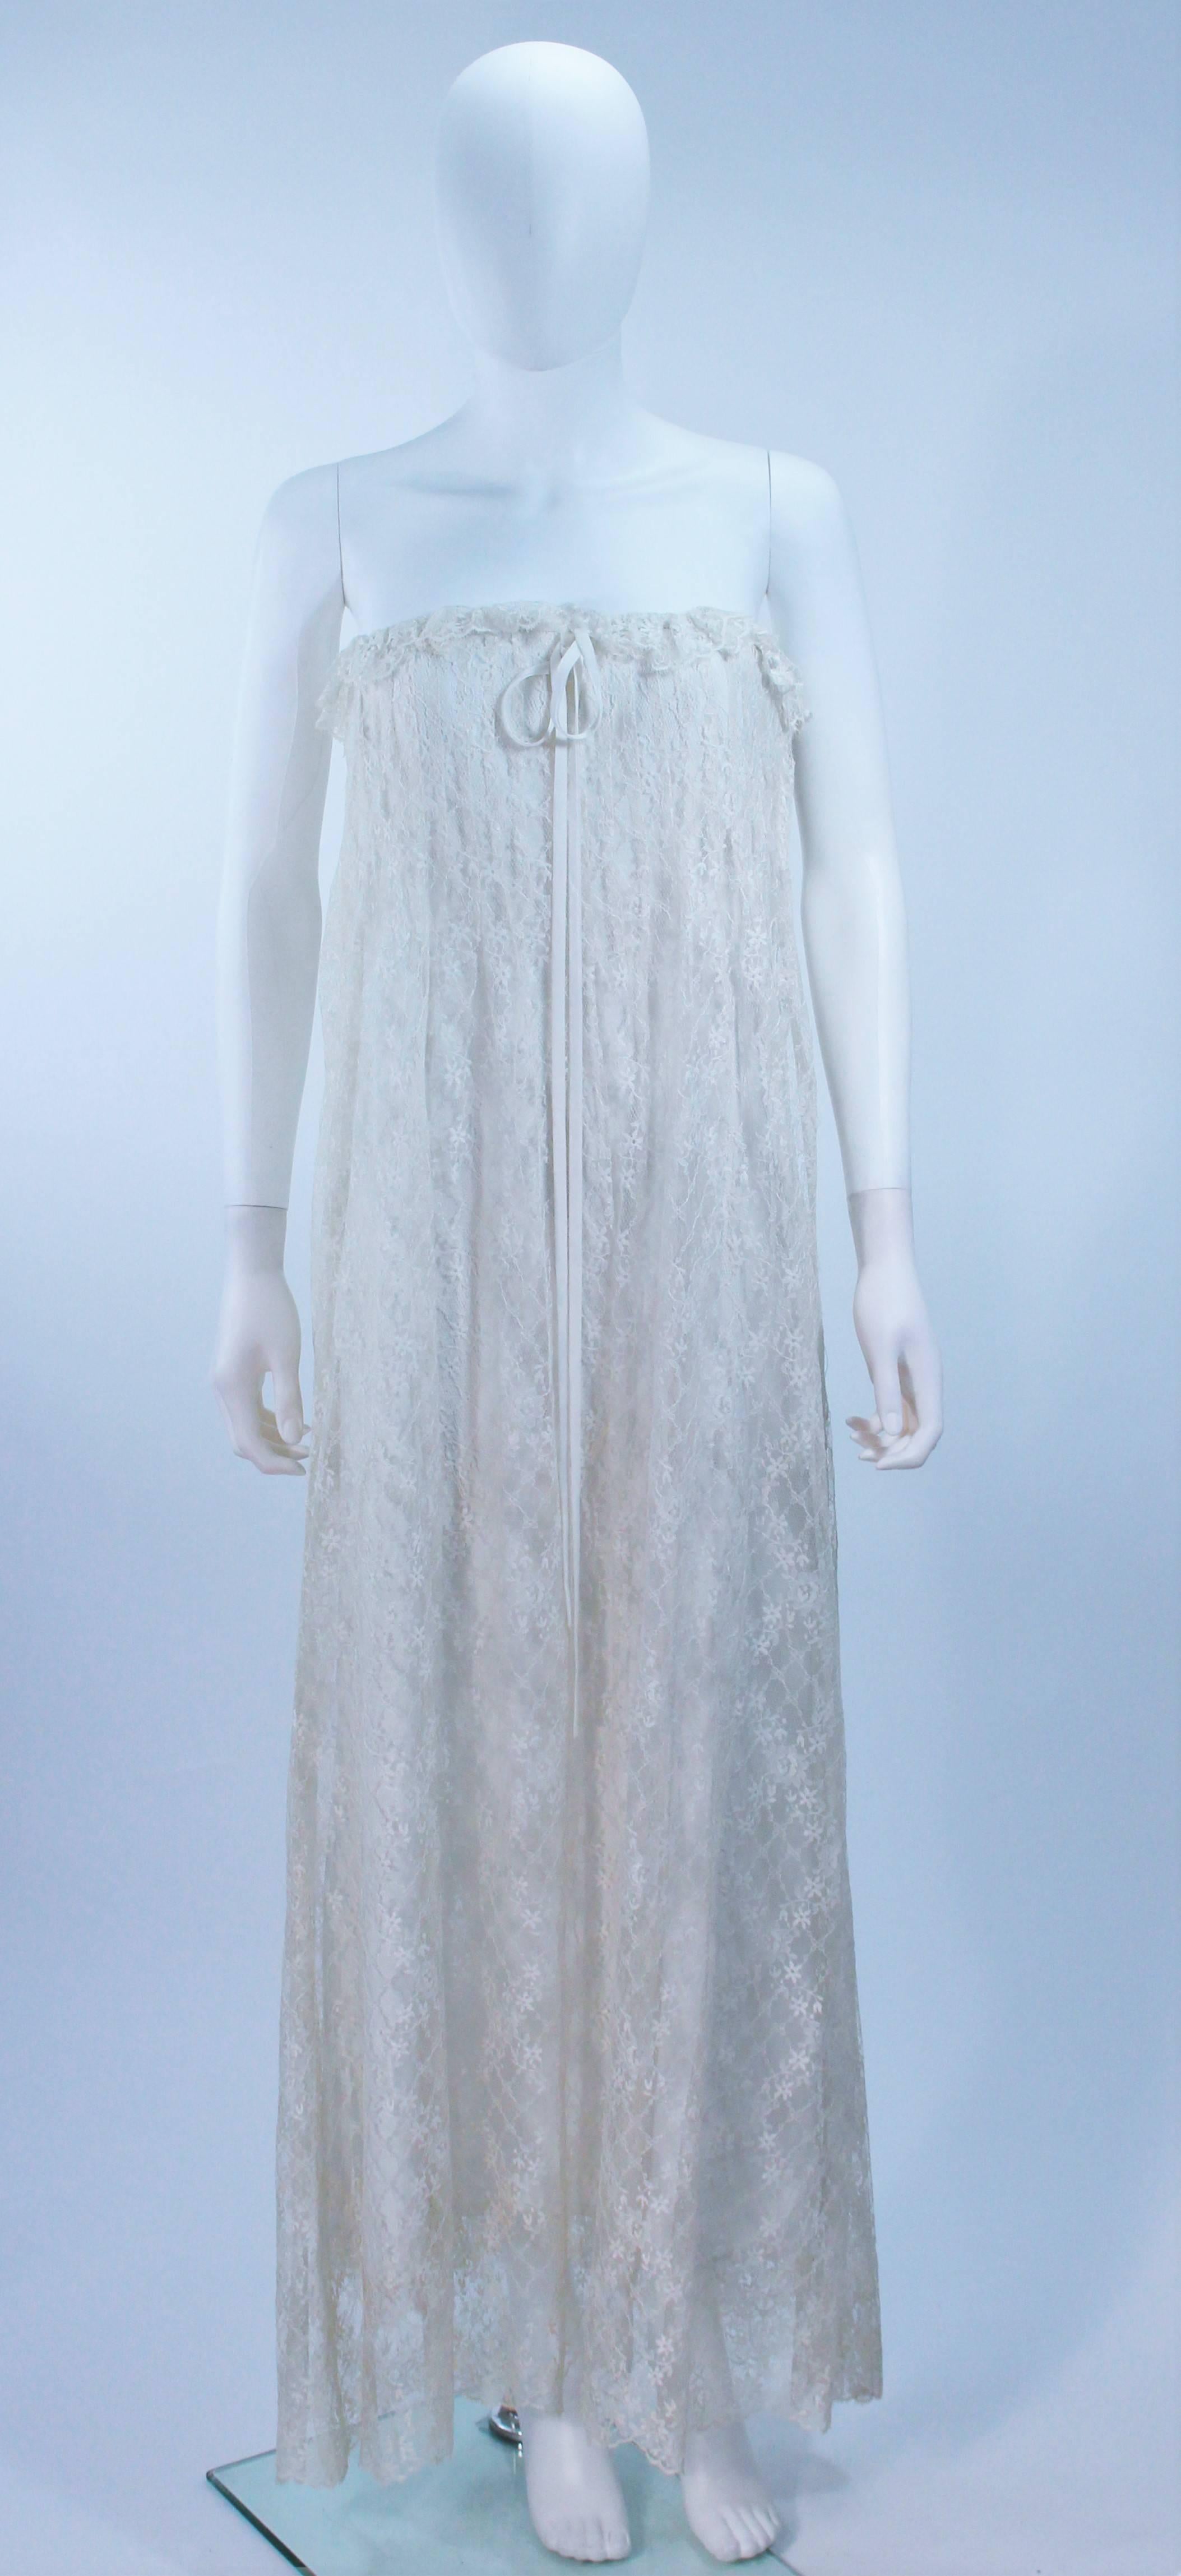  This Bill Blass dress is composed of a white lace with a ruffled trim and satin bow detail. There is a side zipper closure. In excellent vintage condition. 

  **Please cross-reference measurements for personal accuracy. Size in description box